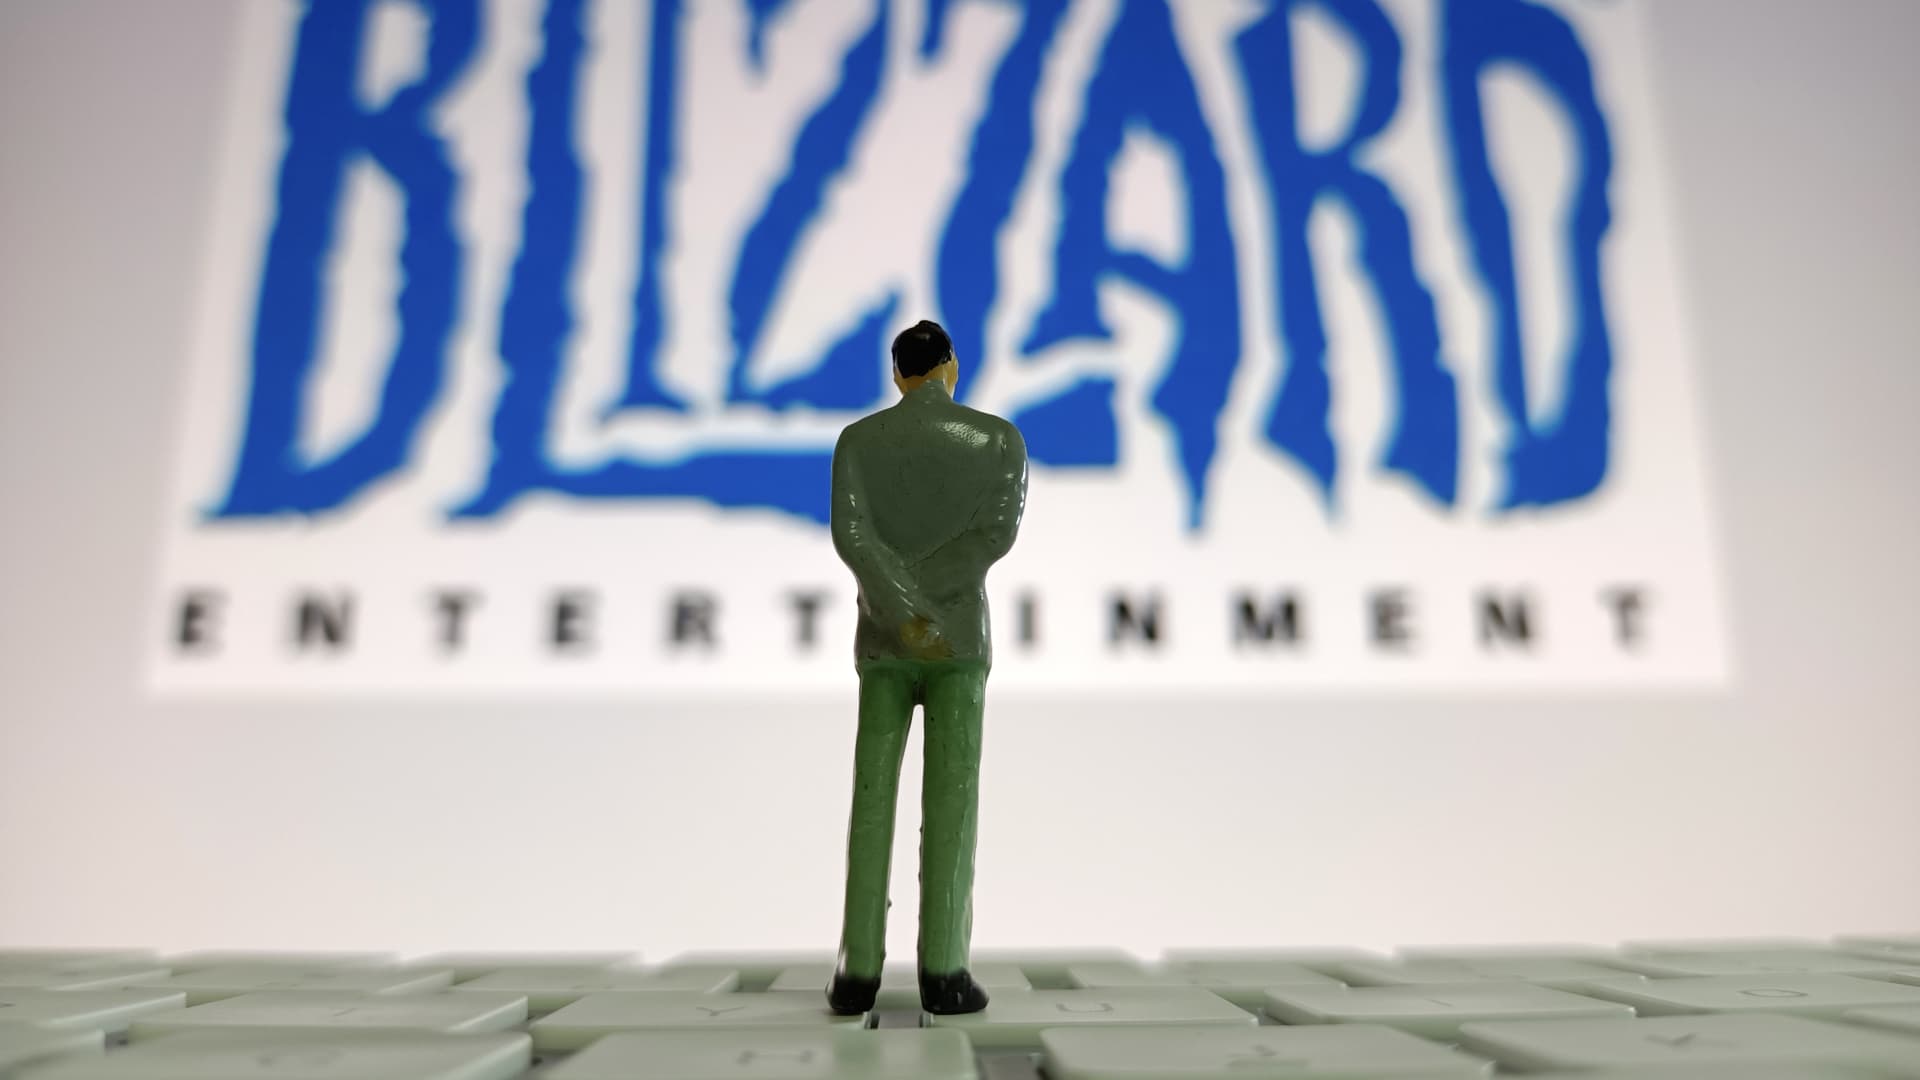 Blizzard seeks new partners to continue offering World of Warcraft in China